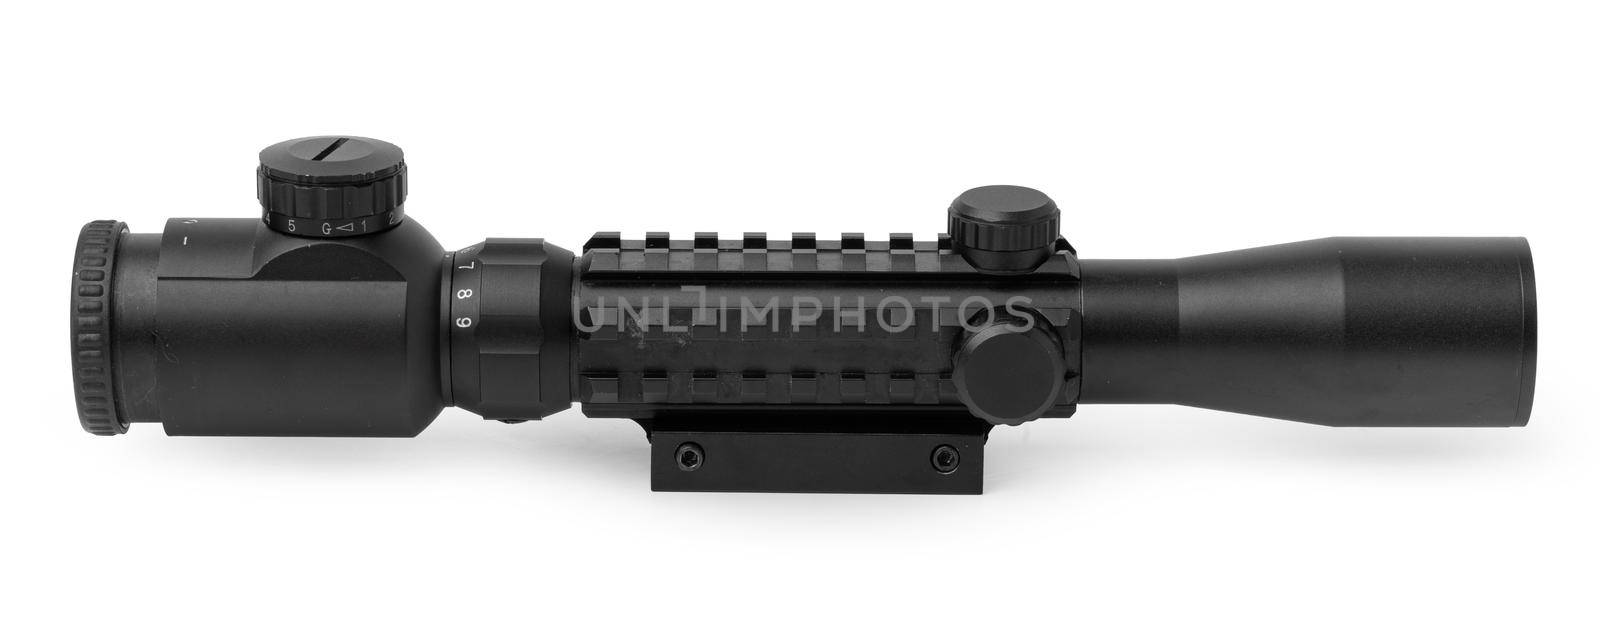 Black optical scope for weapon isolated on white background